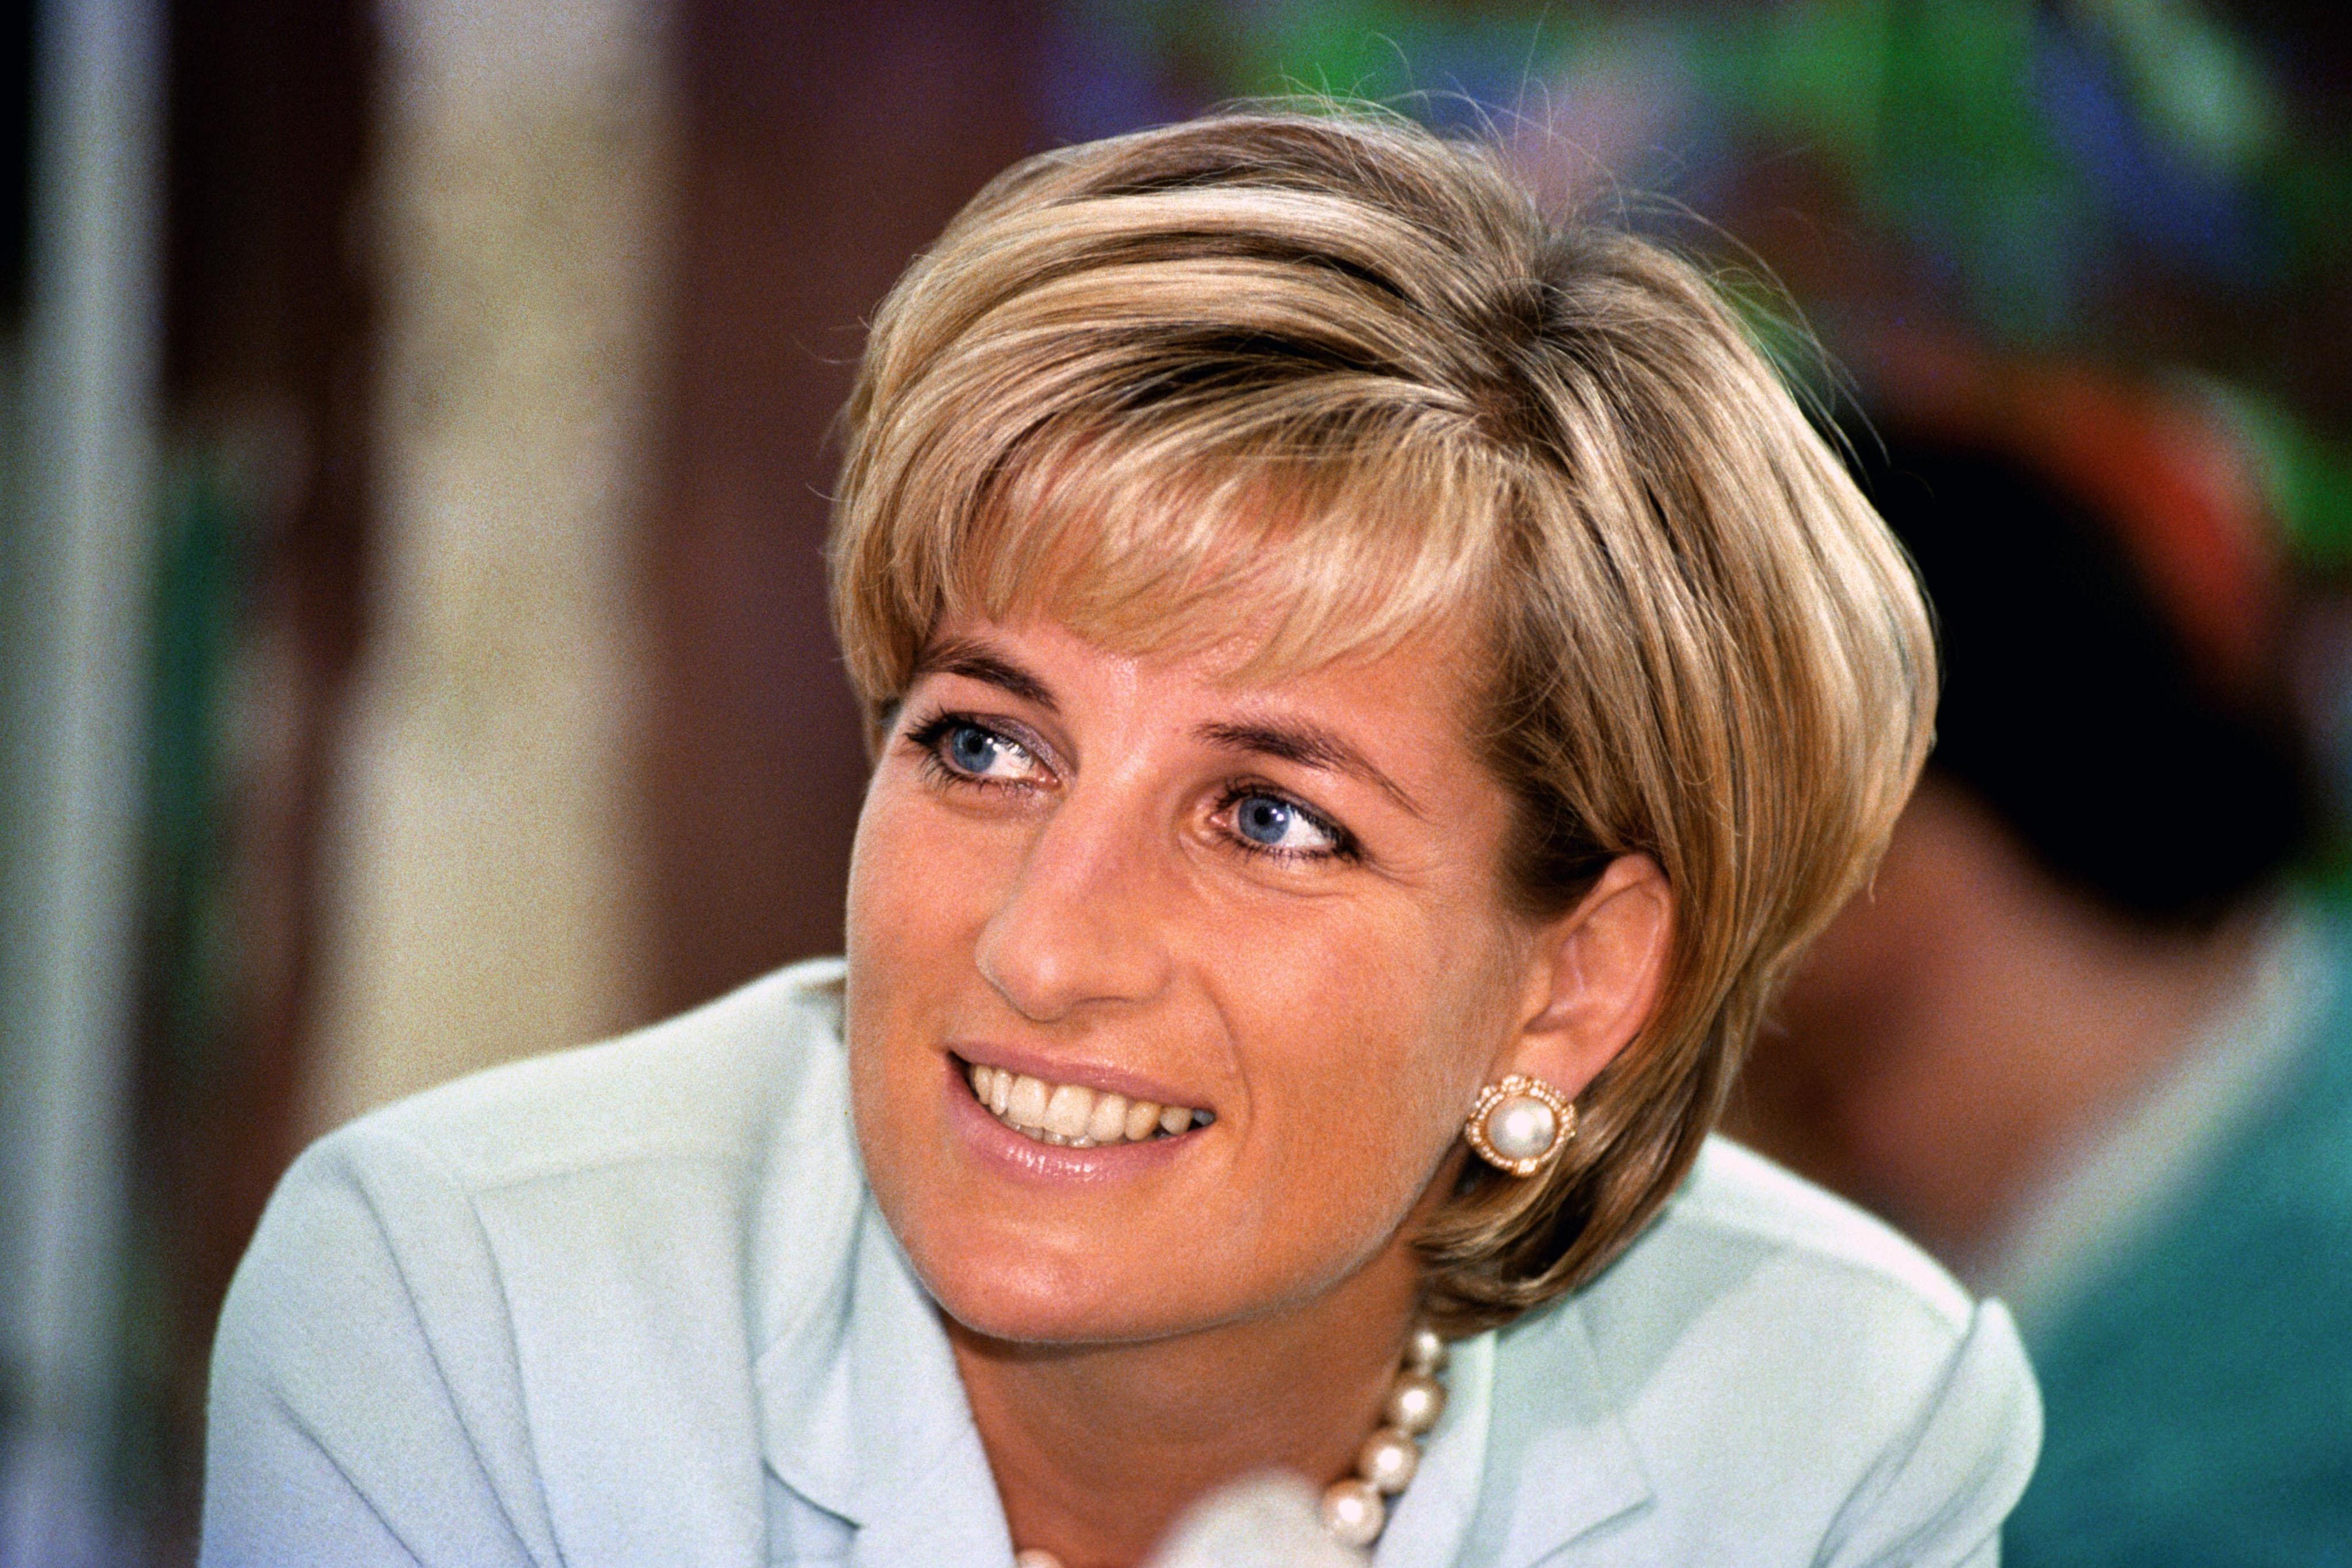 Diana, Princess of Wales exchanged letters with former TV personality Michael Barrymore, a court heard (John Stillwell/PA)